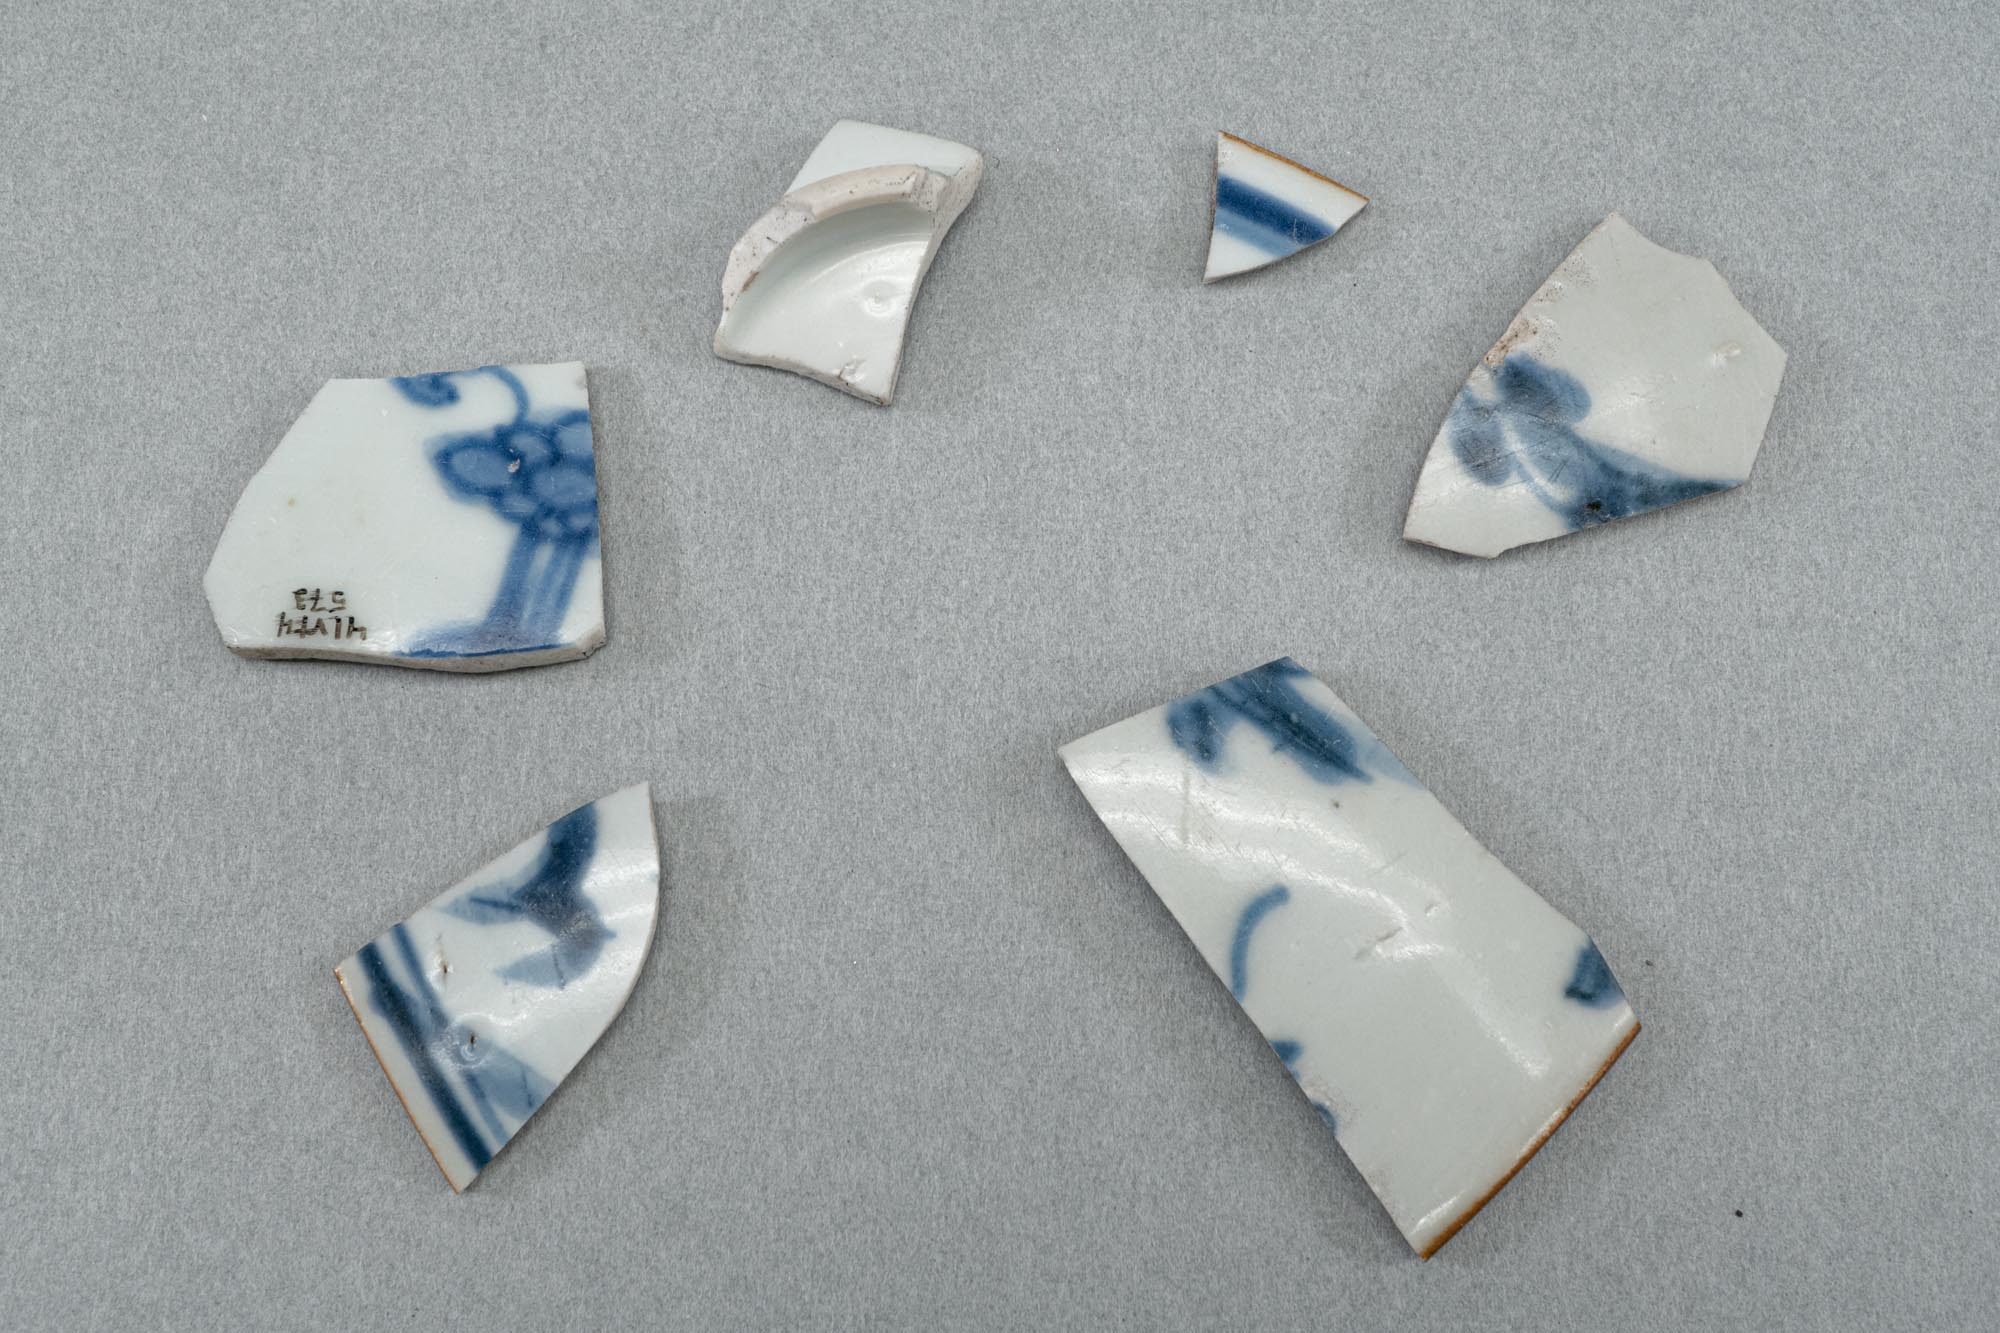 Chinese porcelain  obtained through Spain’s vast trade network was a luxury item used by officers and friars at the presidios.